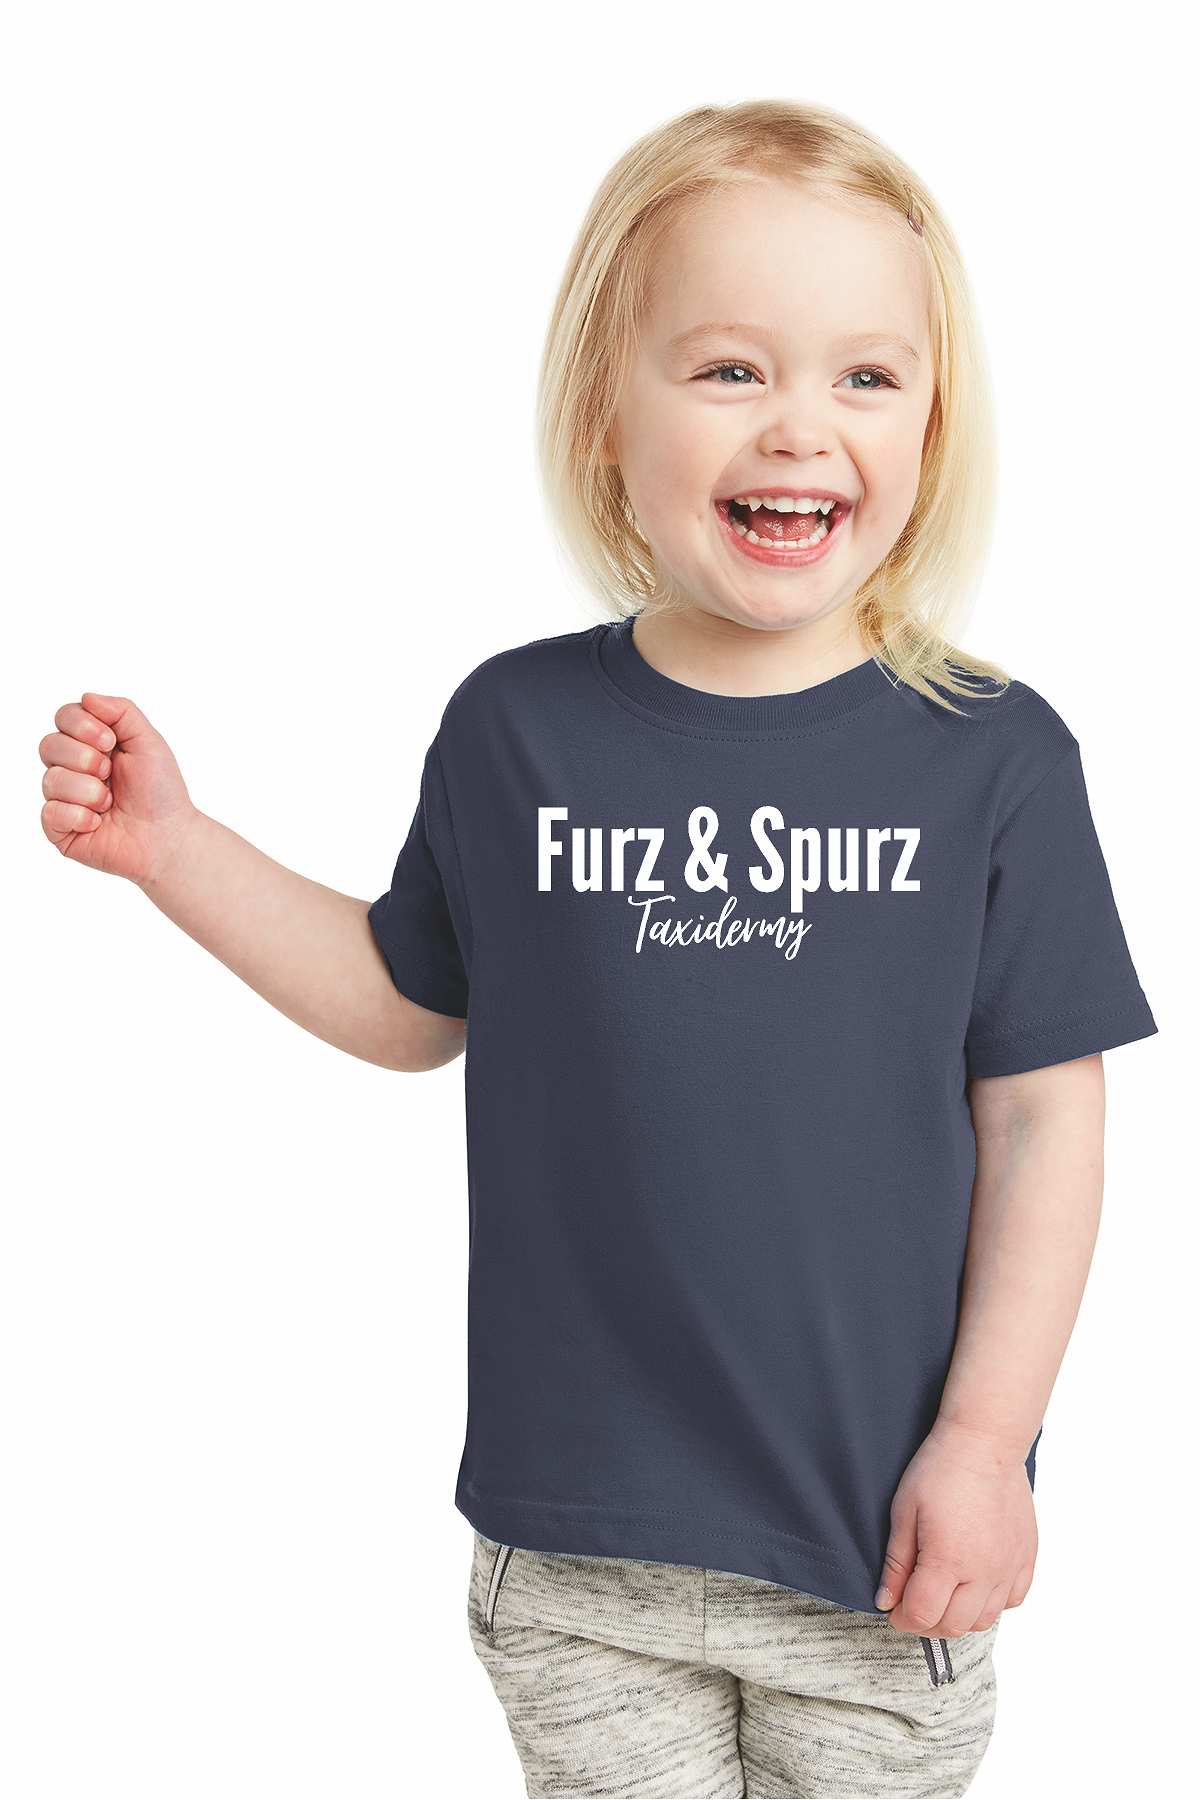 Furz and Spurz Toddler Unisex Tshirts RS3321